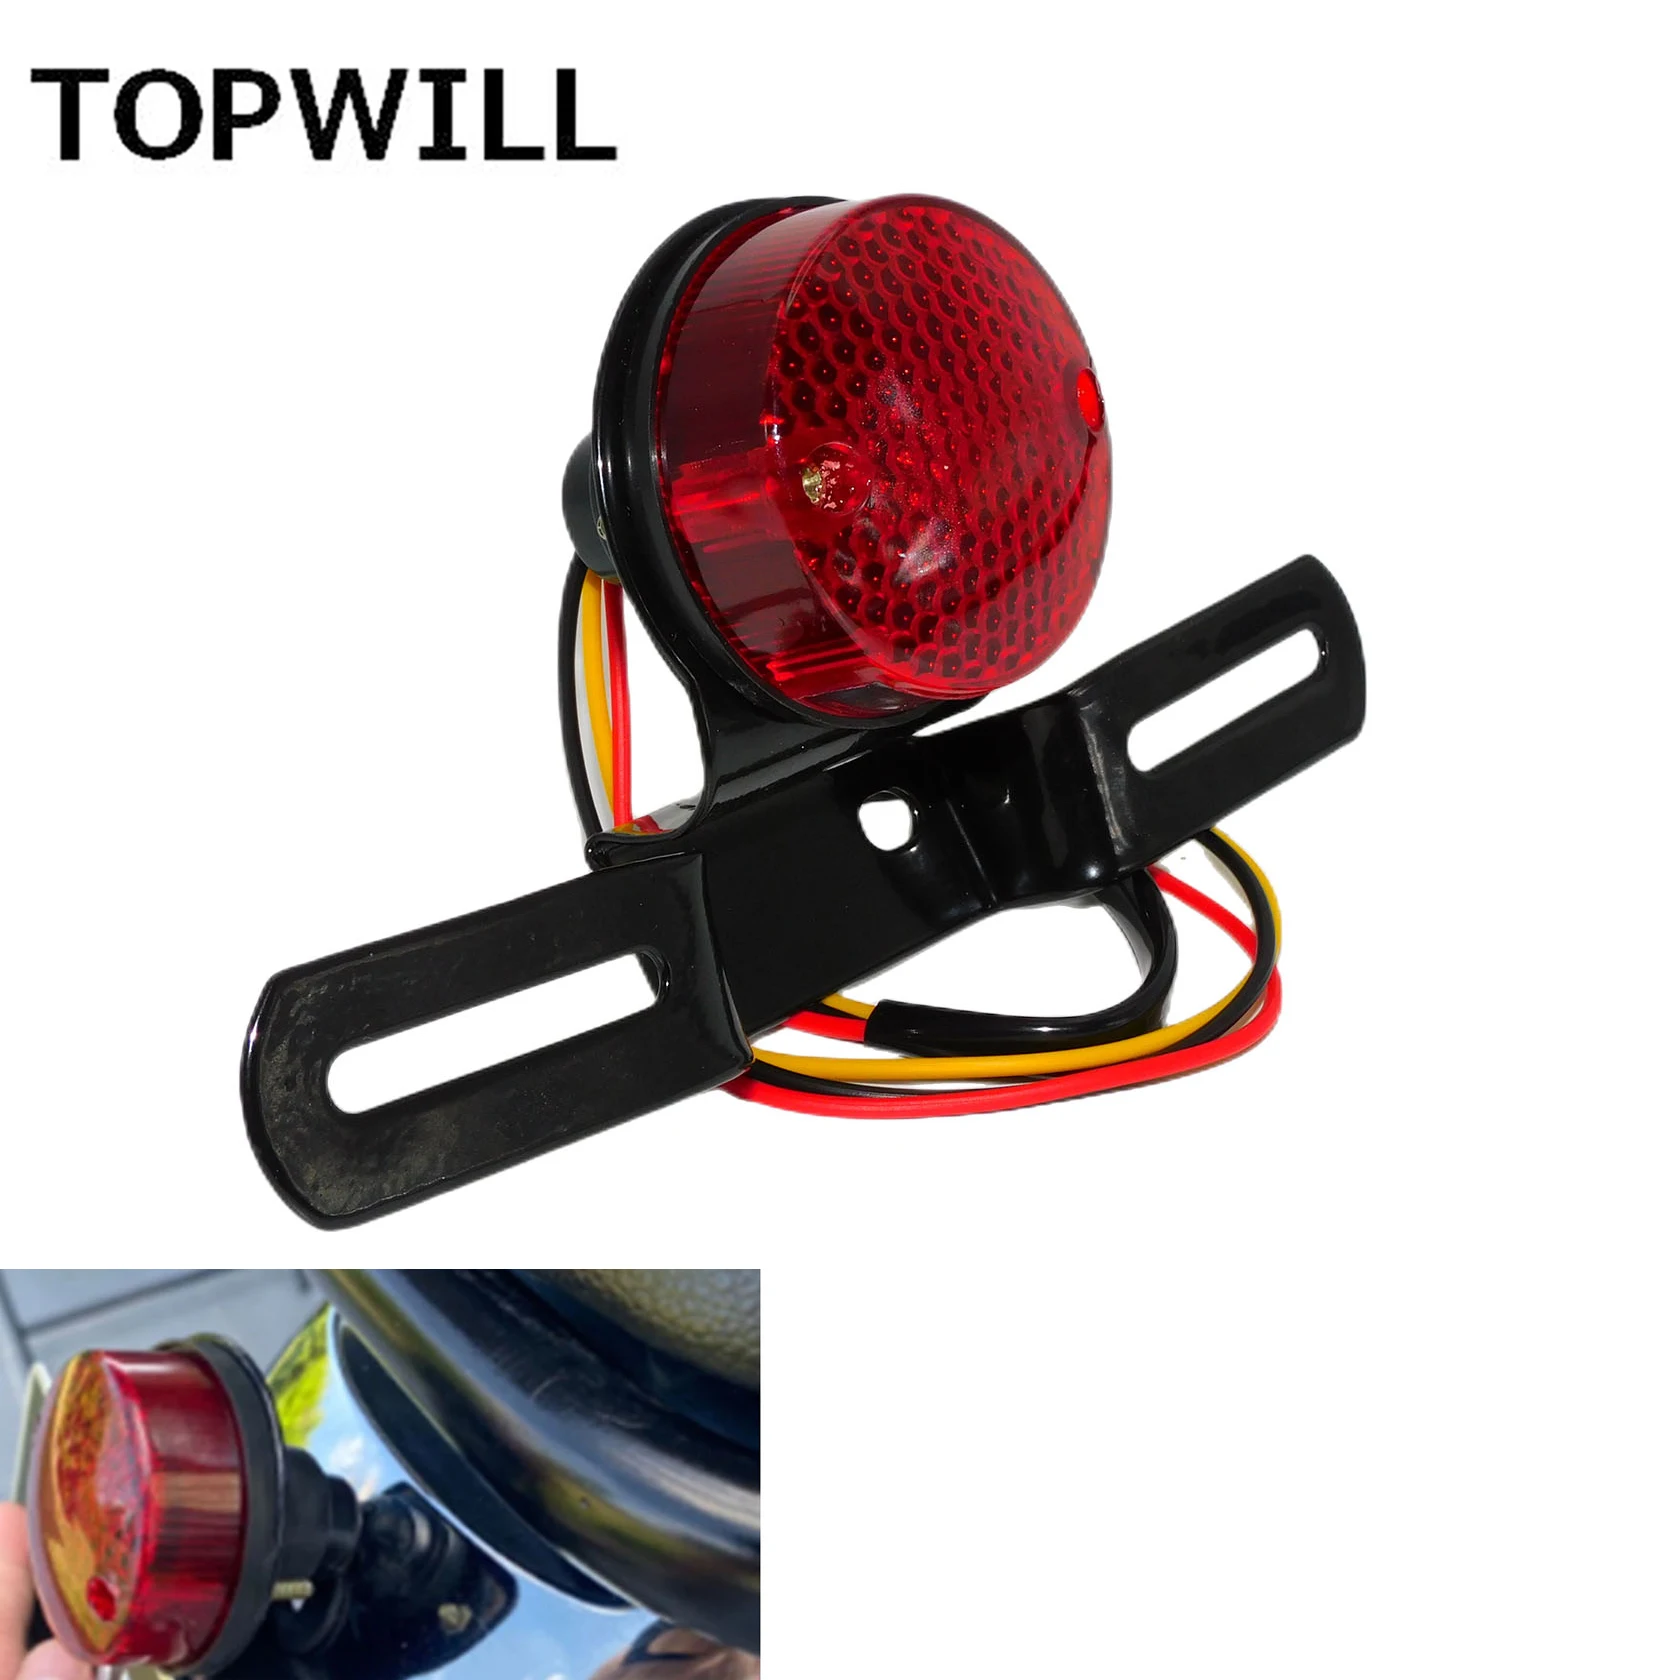 

Motorcycle Retro Round Red Tail Brake Stop Running Light License Plate Bracket For Harley Sportster Dyna Touring Glide Softail